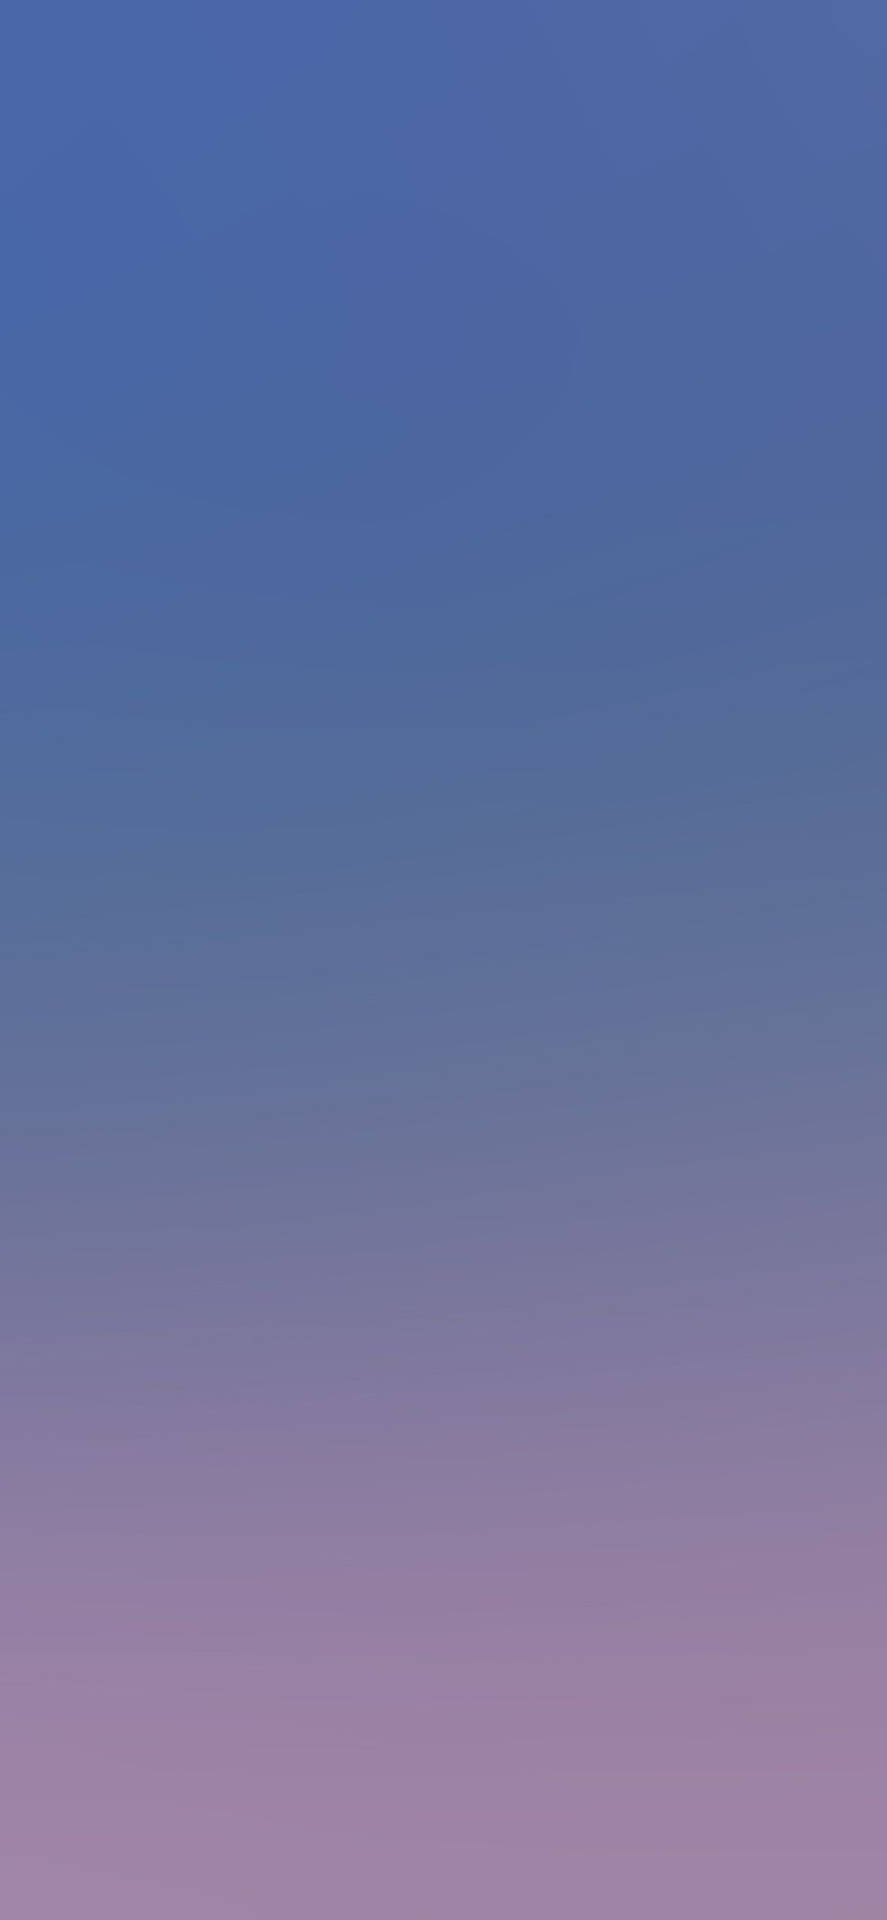 Gradient Of Blue To Light Purple Iphone Background